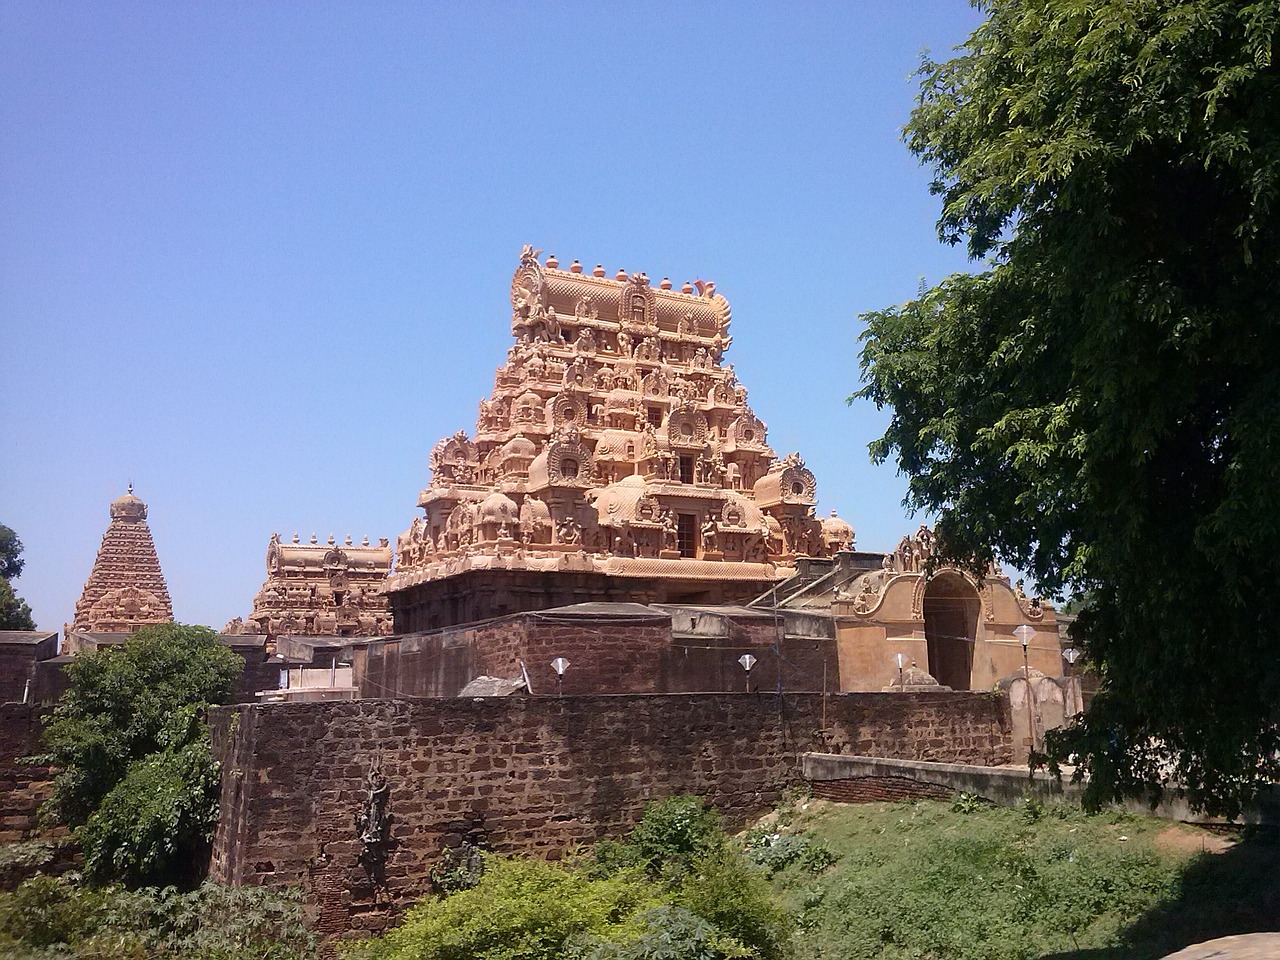 Immersive Day in Thanjavur: Royal Palace, Temples, and Local Cuisine